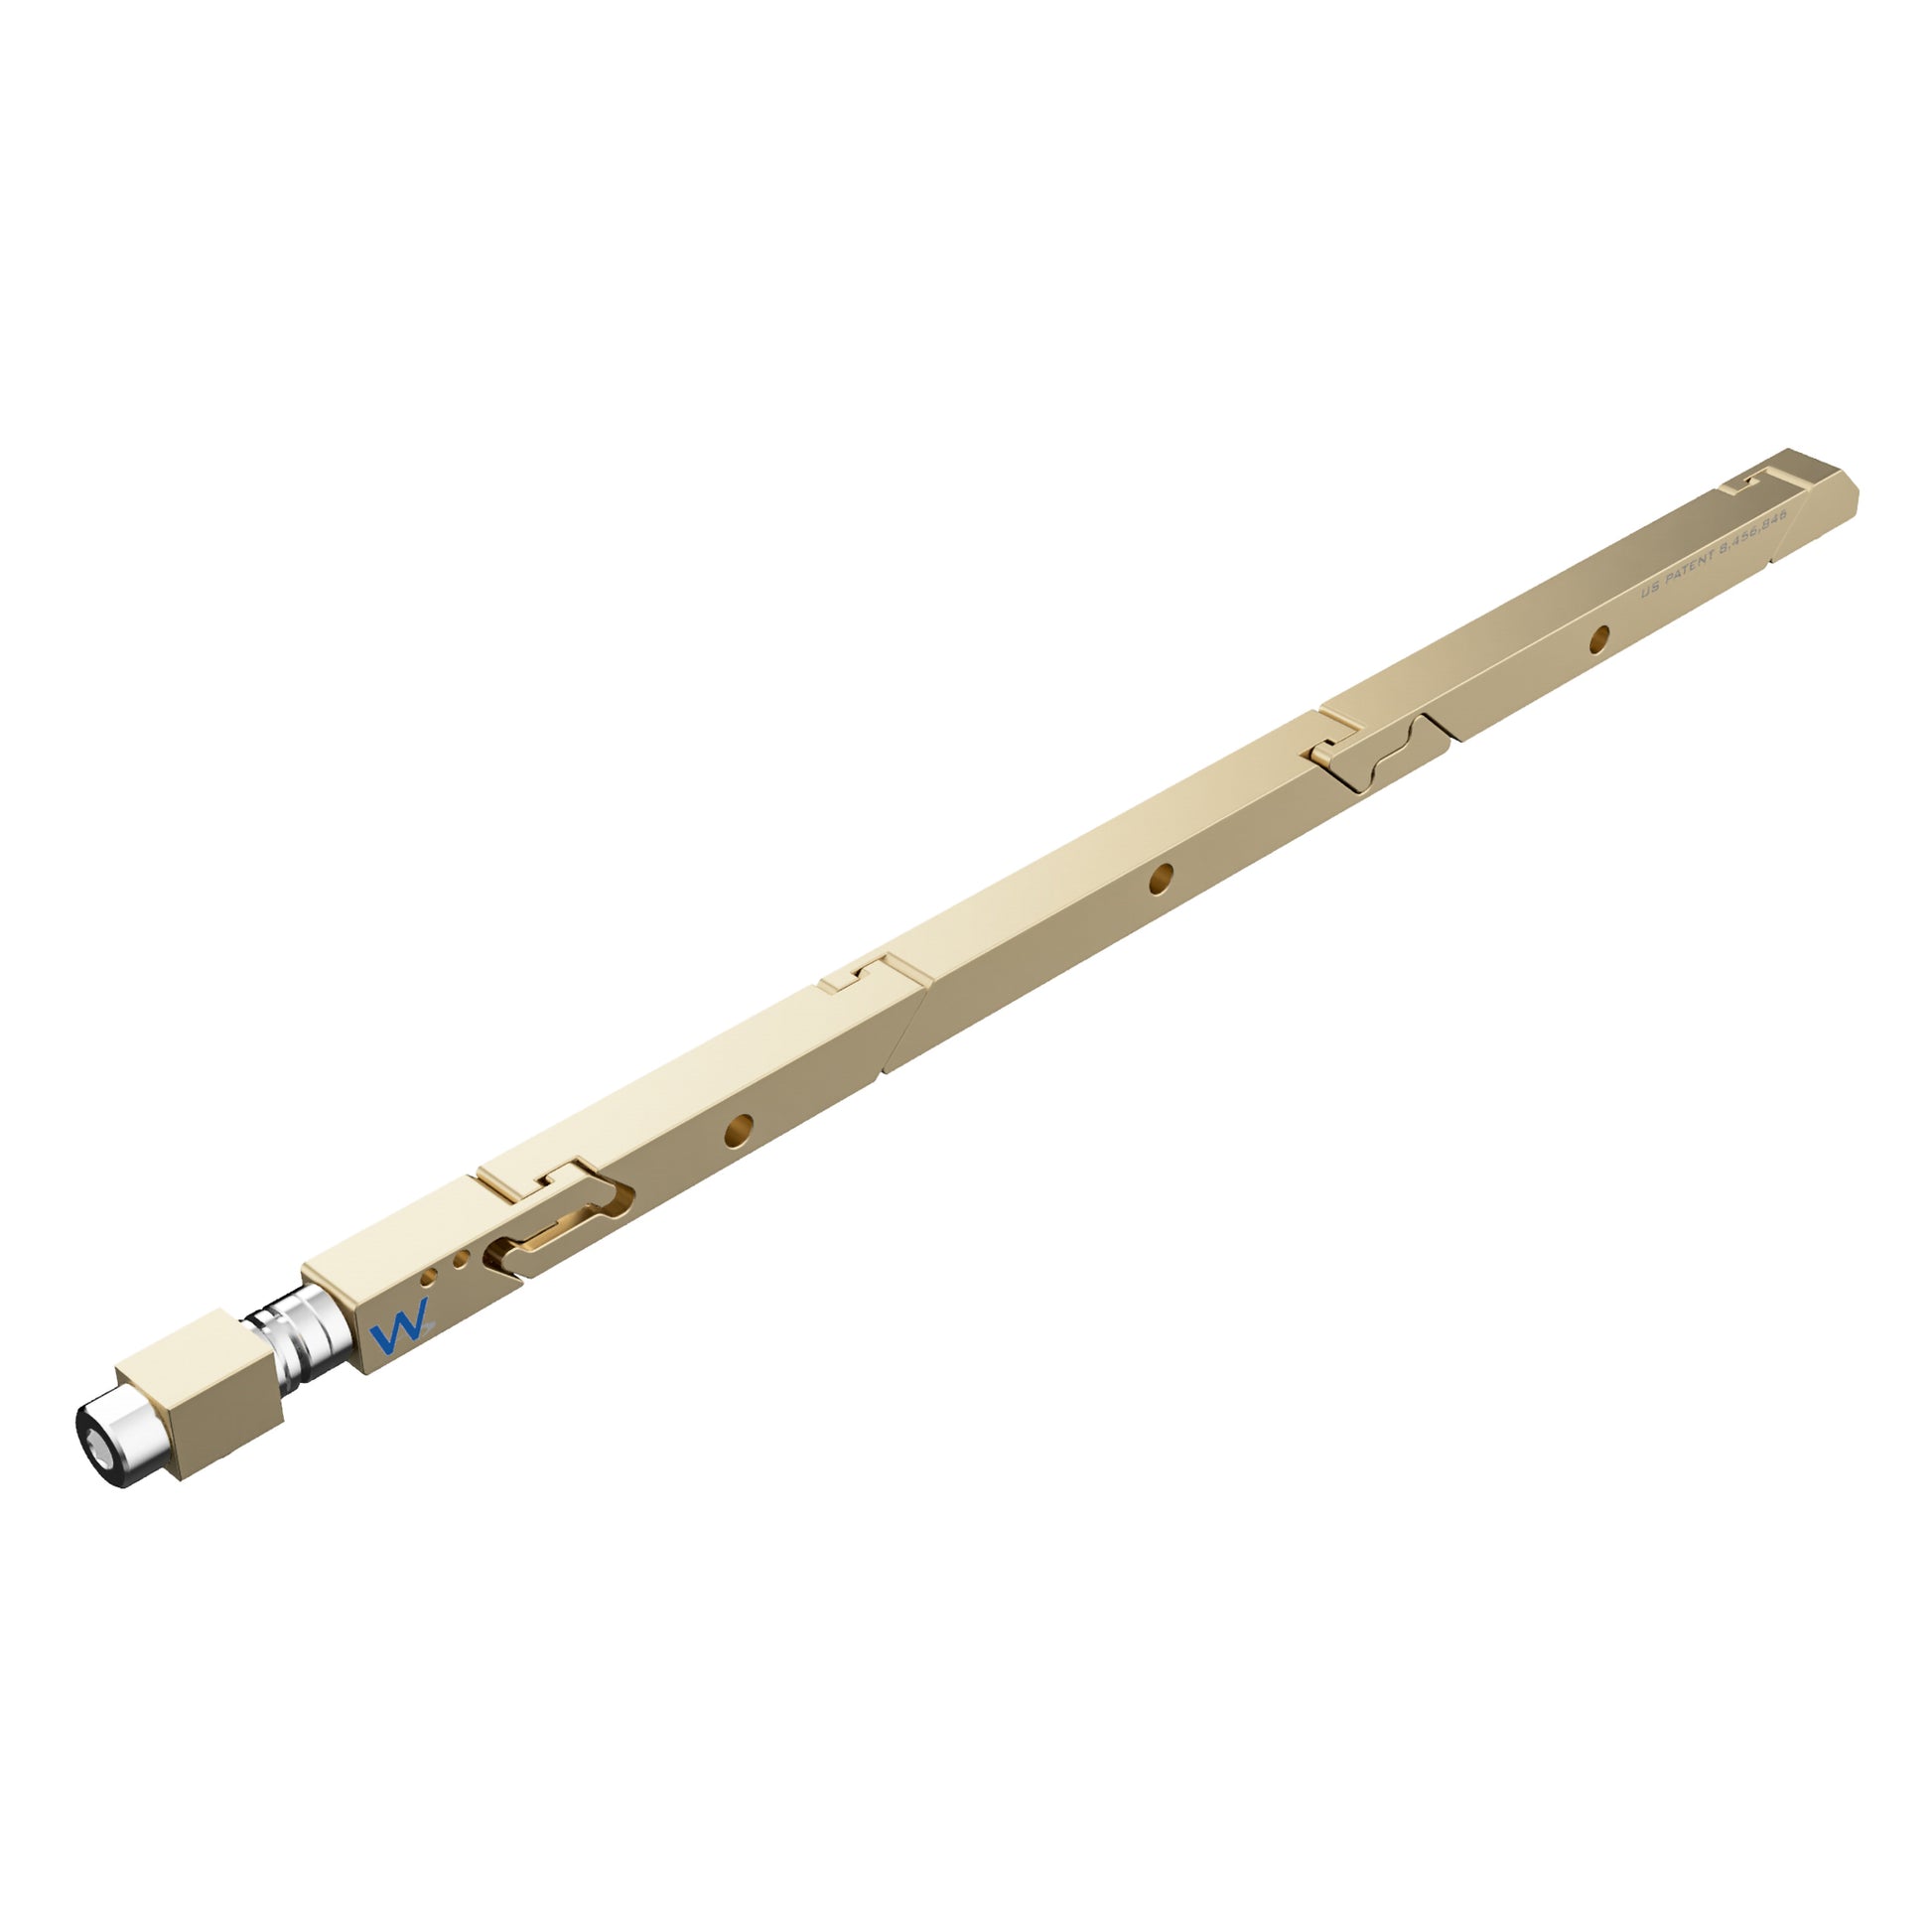 SW5-64-225-225 High Force Wedgelock, segmented long rectulangular hardware component, Gold Chemical Film Finish